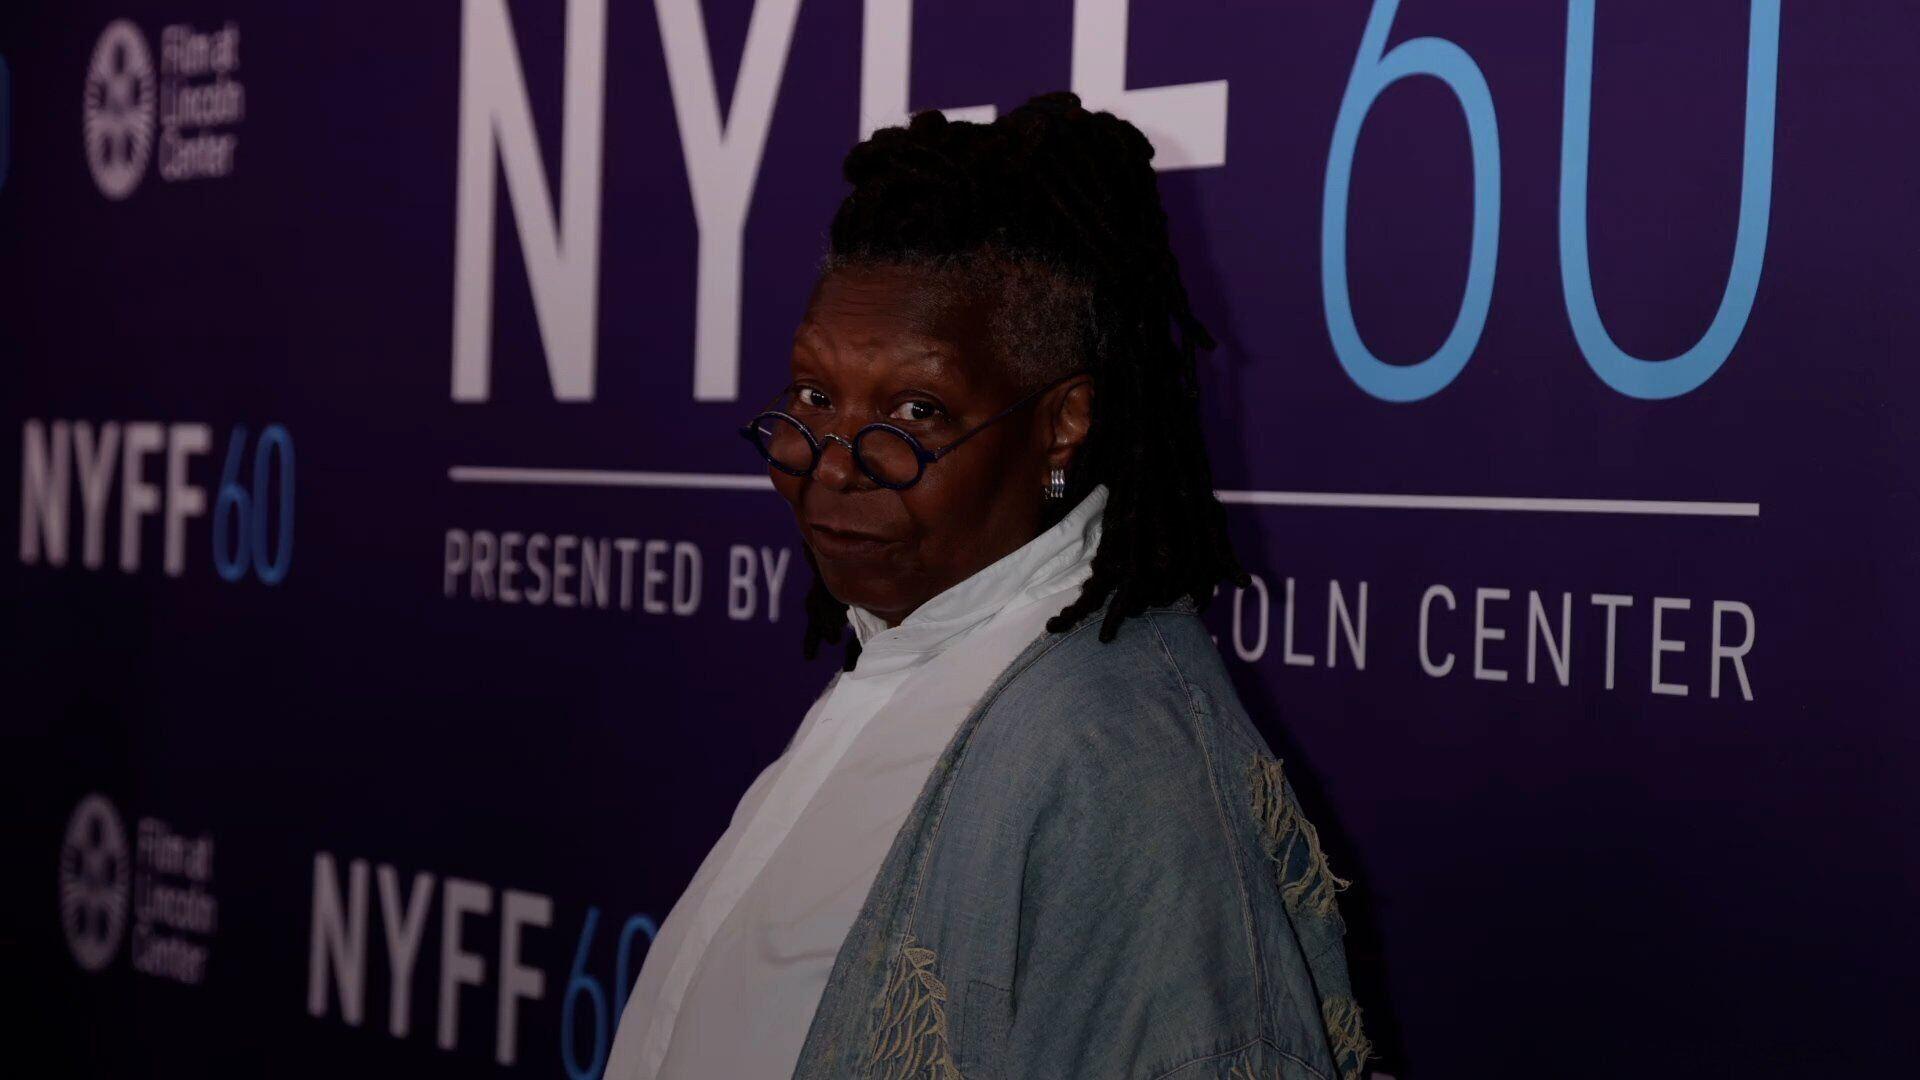 Whoopi Goldberg Corrects Film Critic Who Claimed She Wore 'Till' Fat Suit:  'That Was Not a Fat Suit, That Was Me